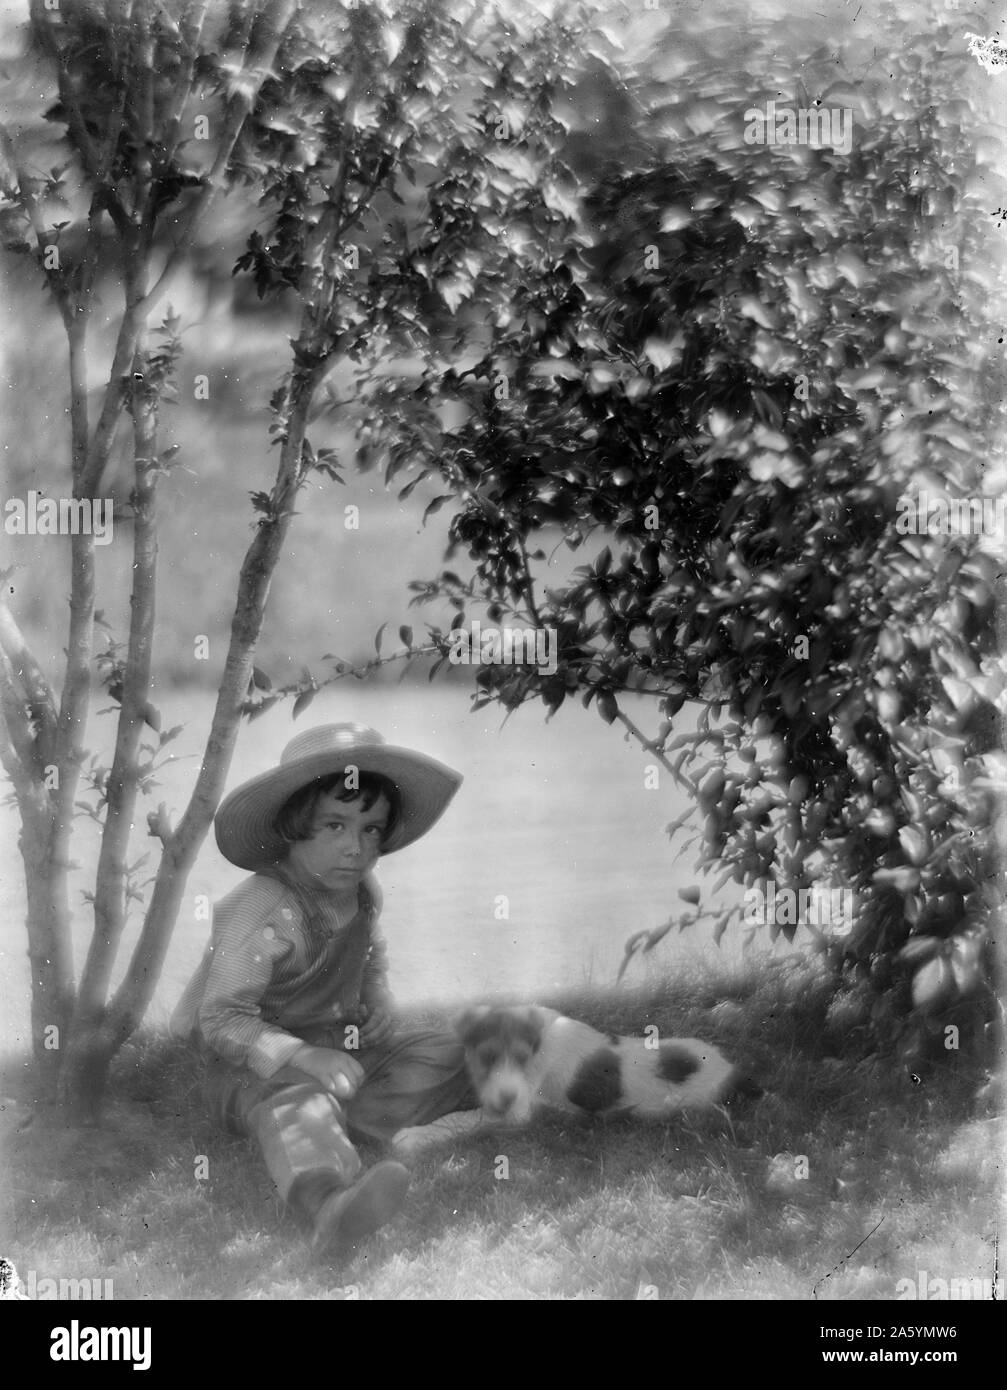 Photograph of a Boy with a dog, a study made at Oceanside. Black and White. The boy is wearing overalls and a hat, sat next to a tree on the ground. The dog sits next to him in the shadow of shrubbery. In the background is a pond. Circa 1904 Gertrude Käsebier, 1852-1934, photographer. Stock Photo